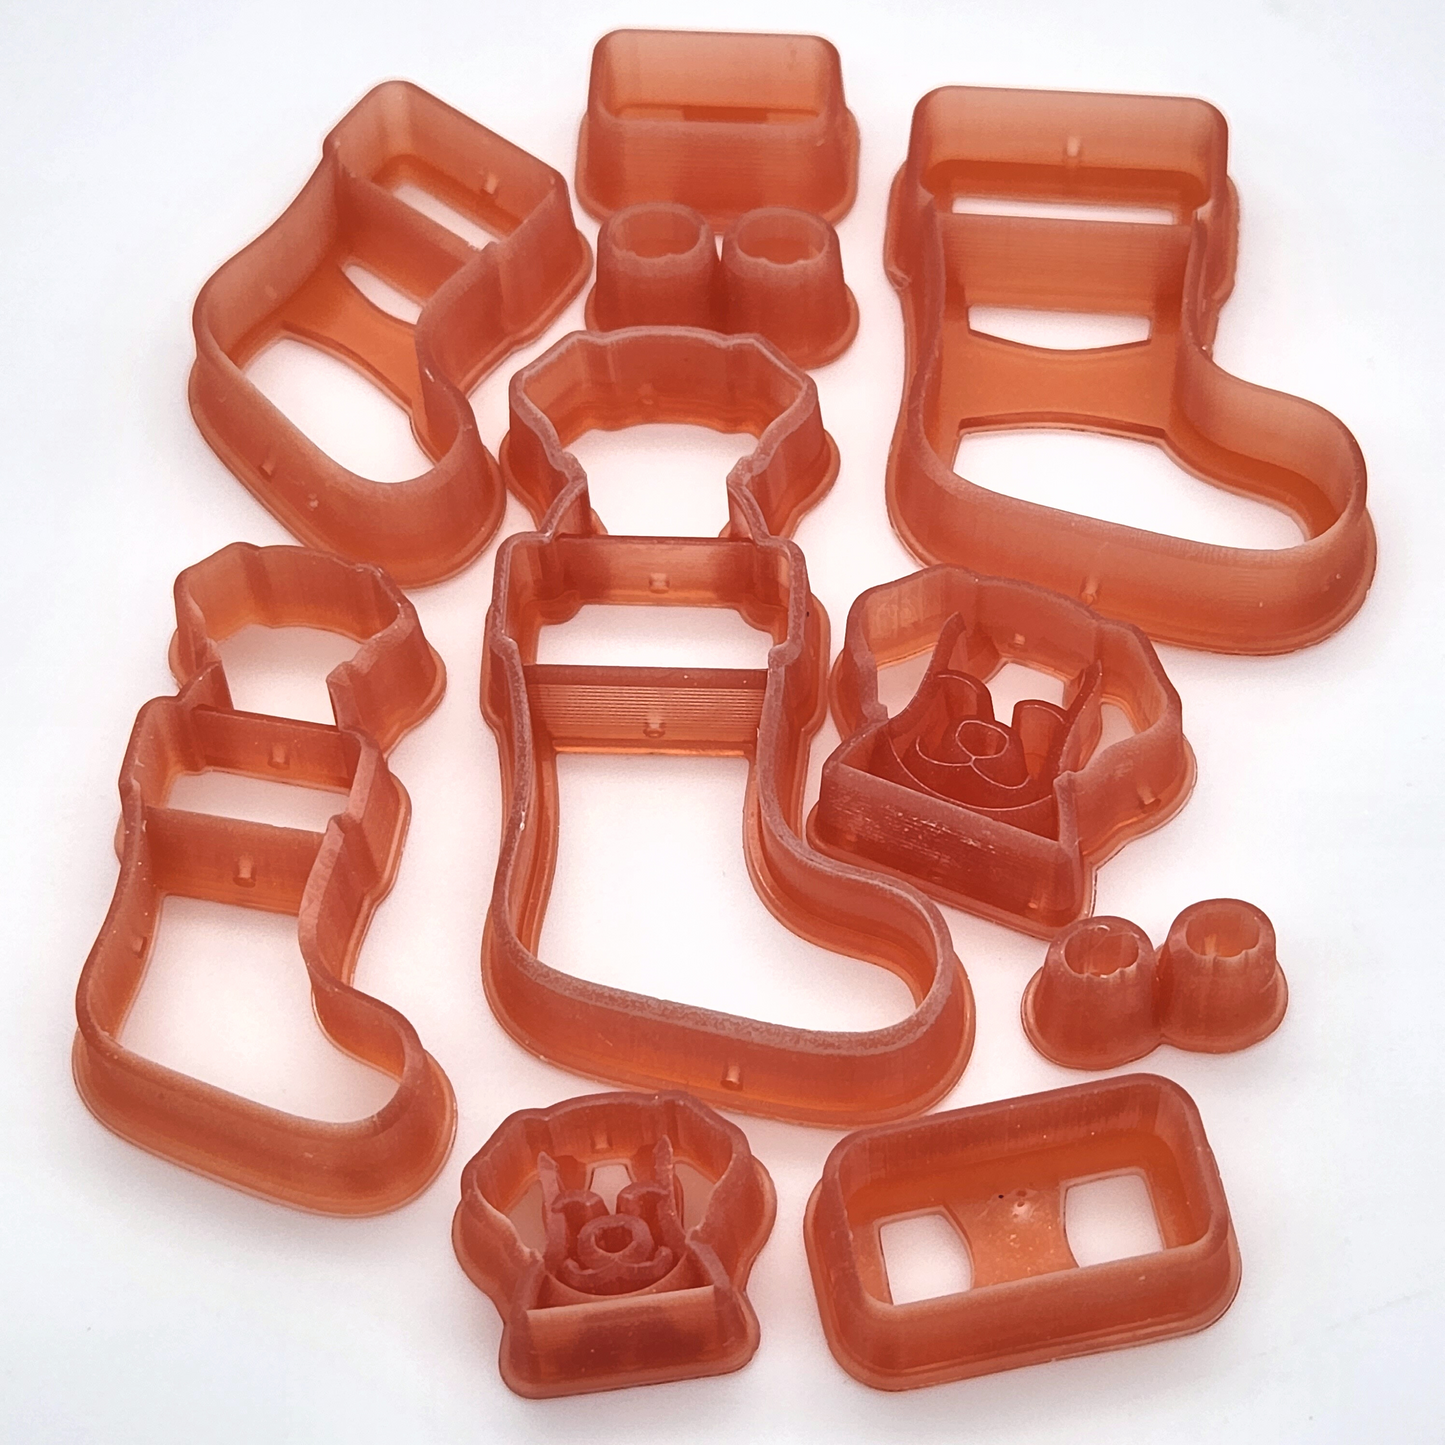 Super sharp resin polymer clay cutters puppy dog in stocking cutter set